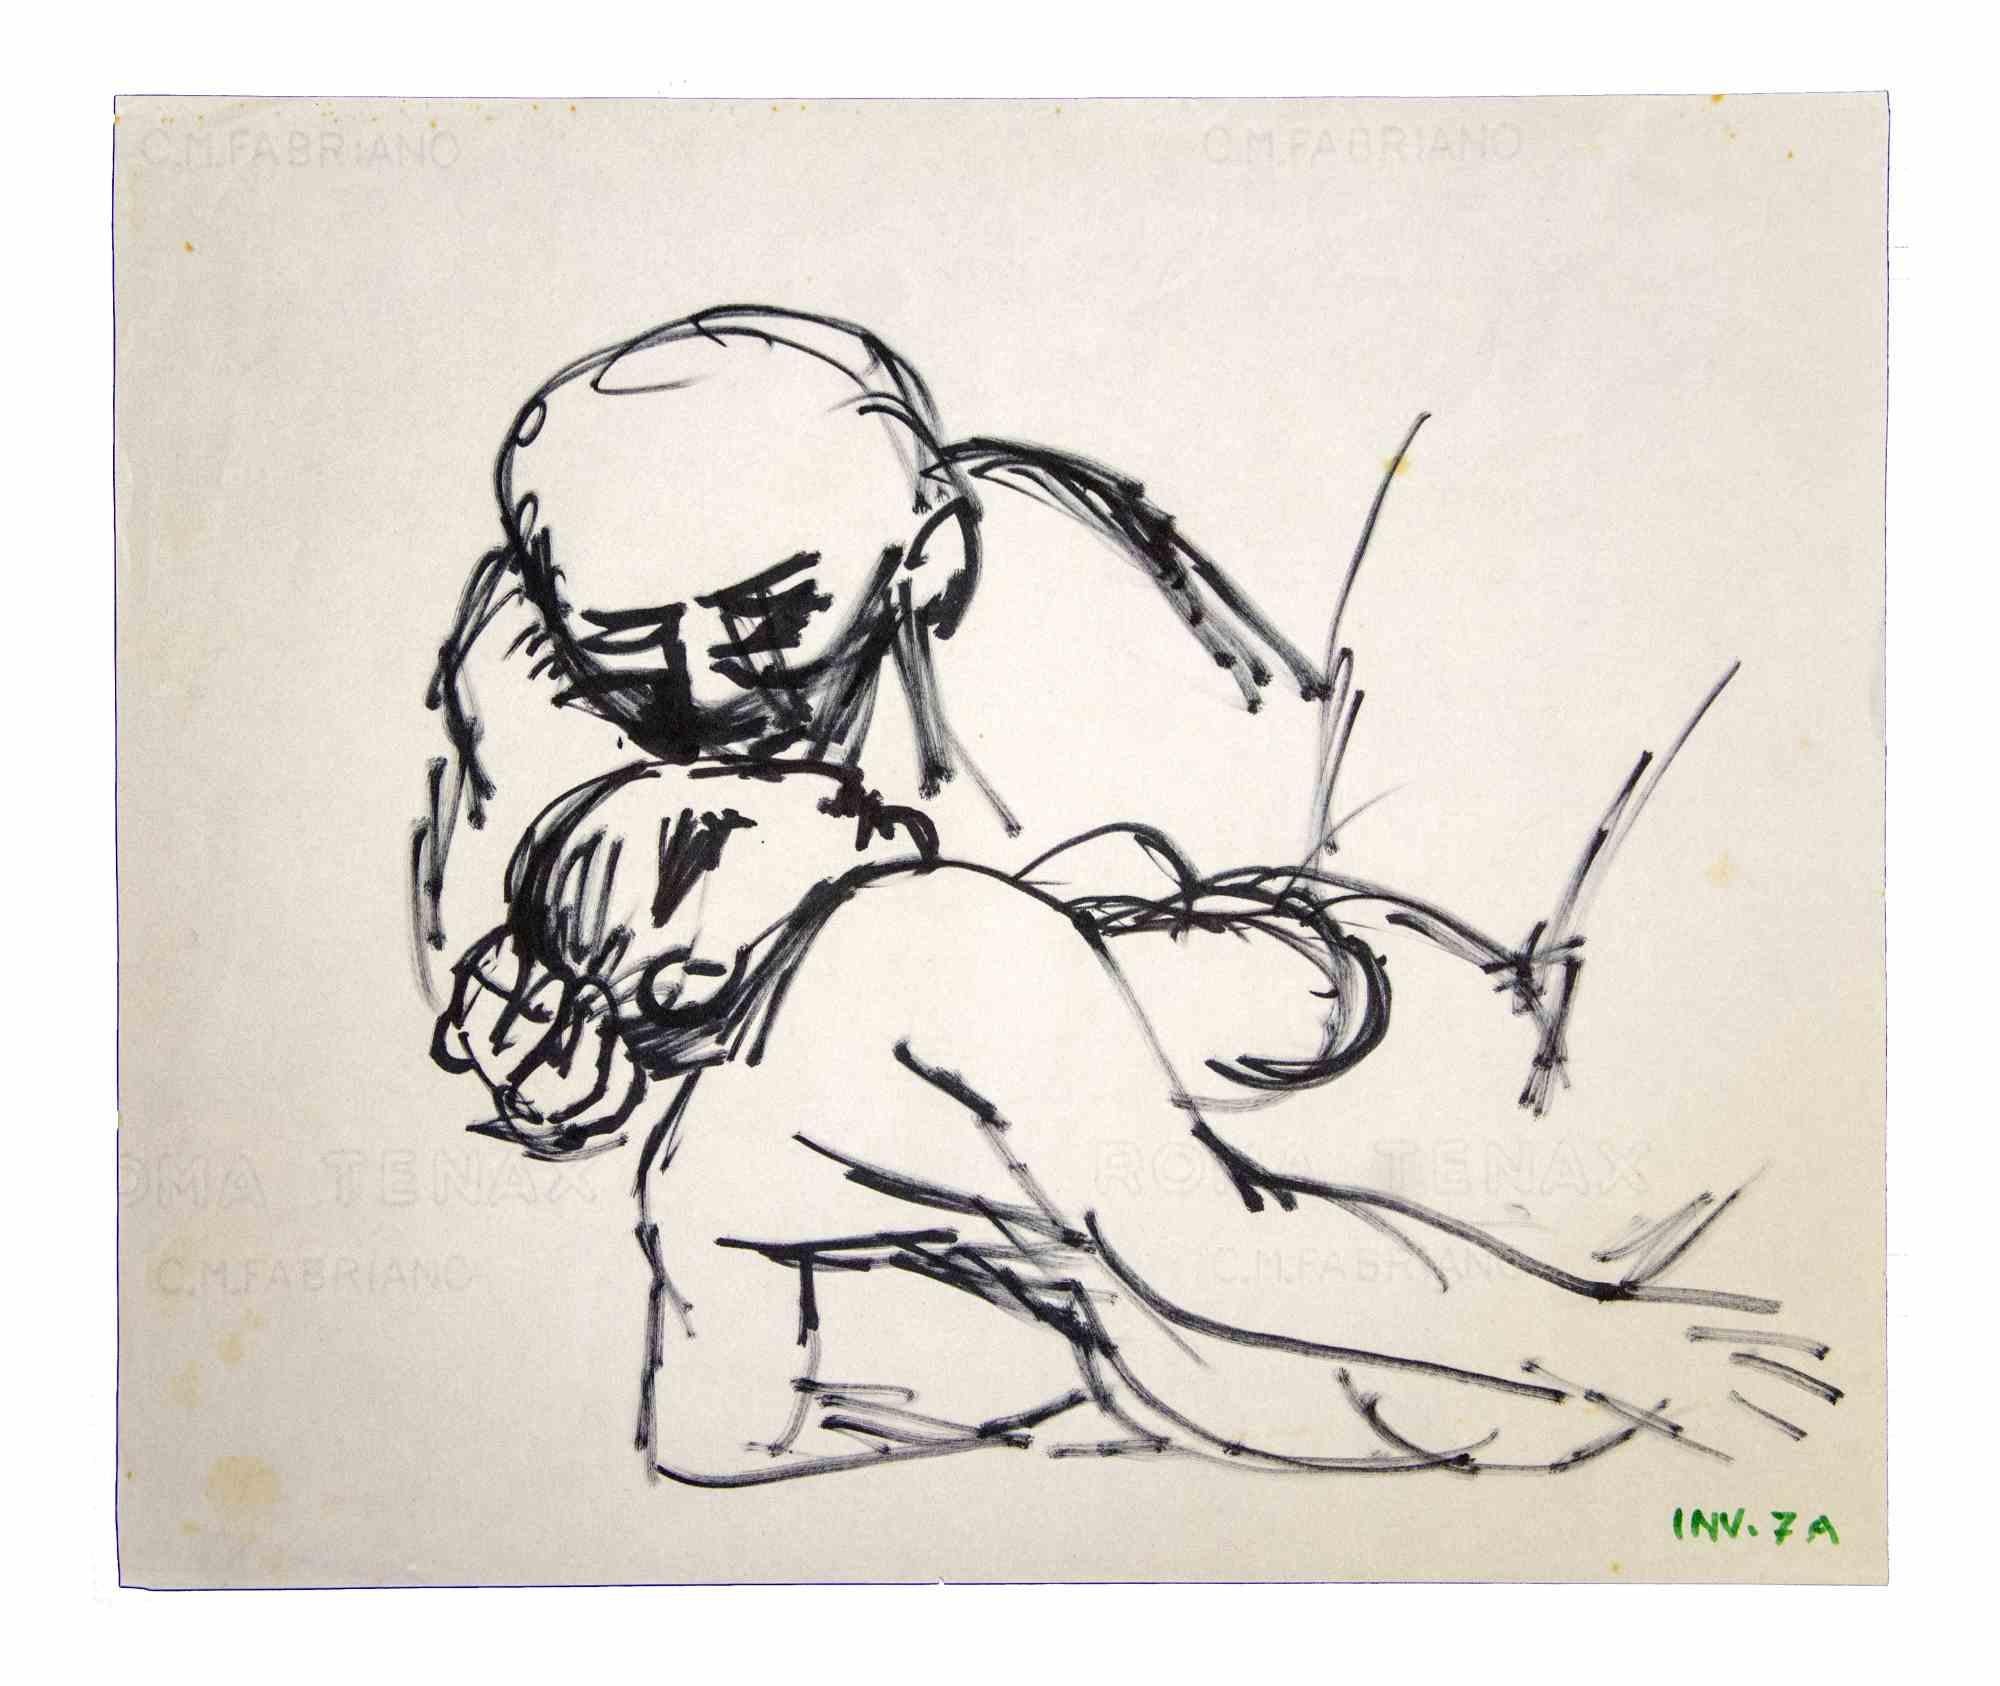 Two Figures is an artwork realized in the 1970s by the Italian Contemporary artist  Leo Guida  (1992 - 2017).

Original drawings in Black Marker pen on paper.

Good conditions but aged.

The artwork is depicted through strong strokes in